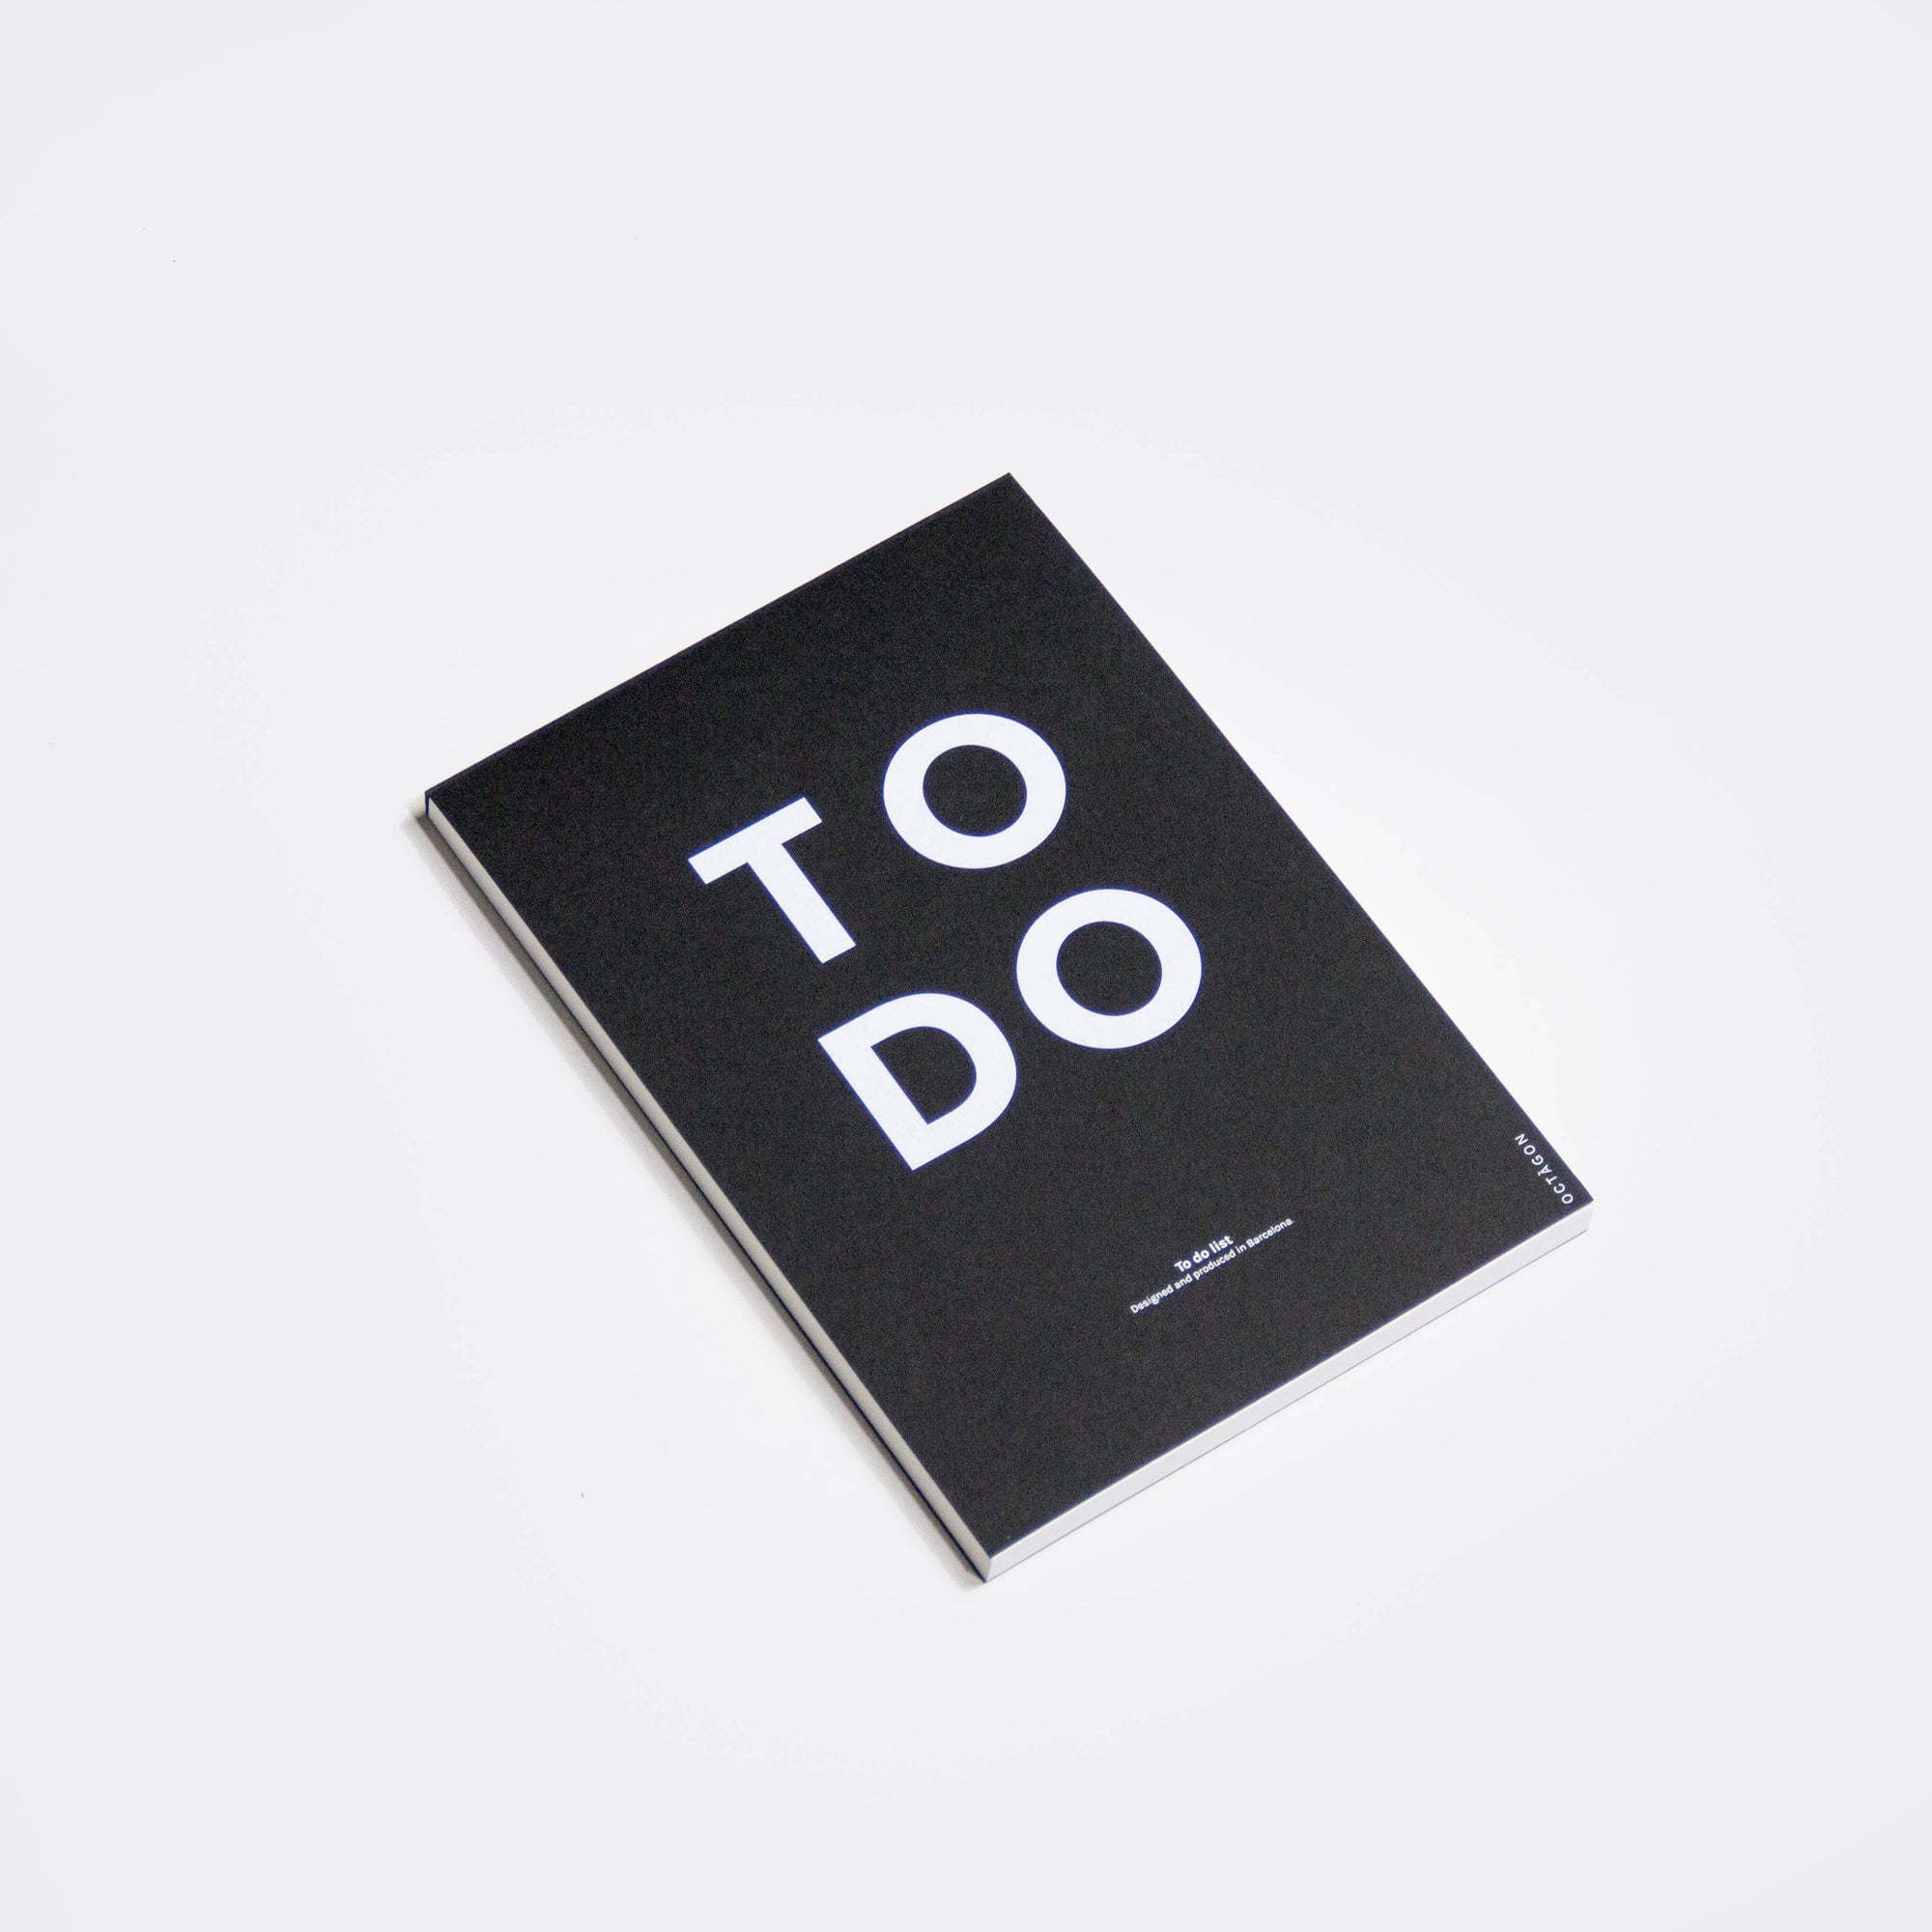 TO DO Notepad by Octagon Design